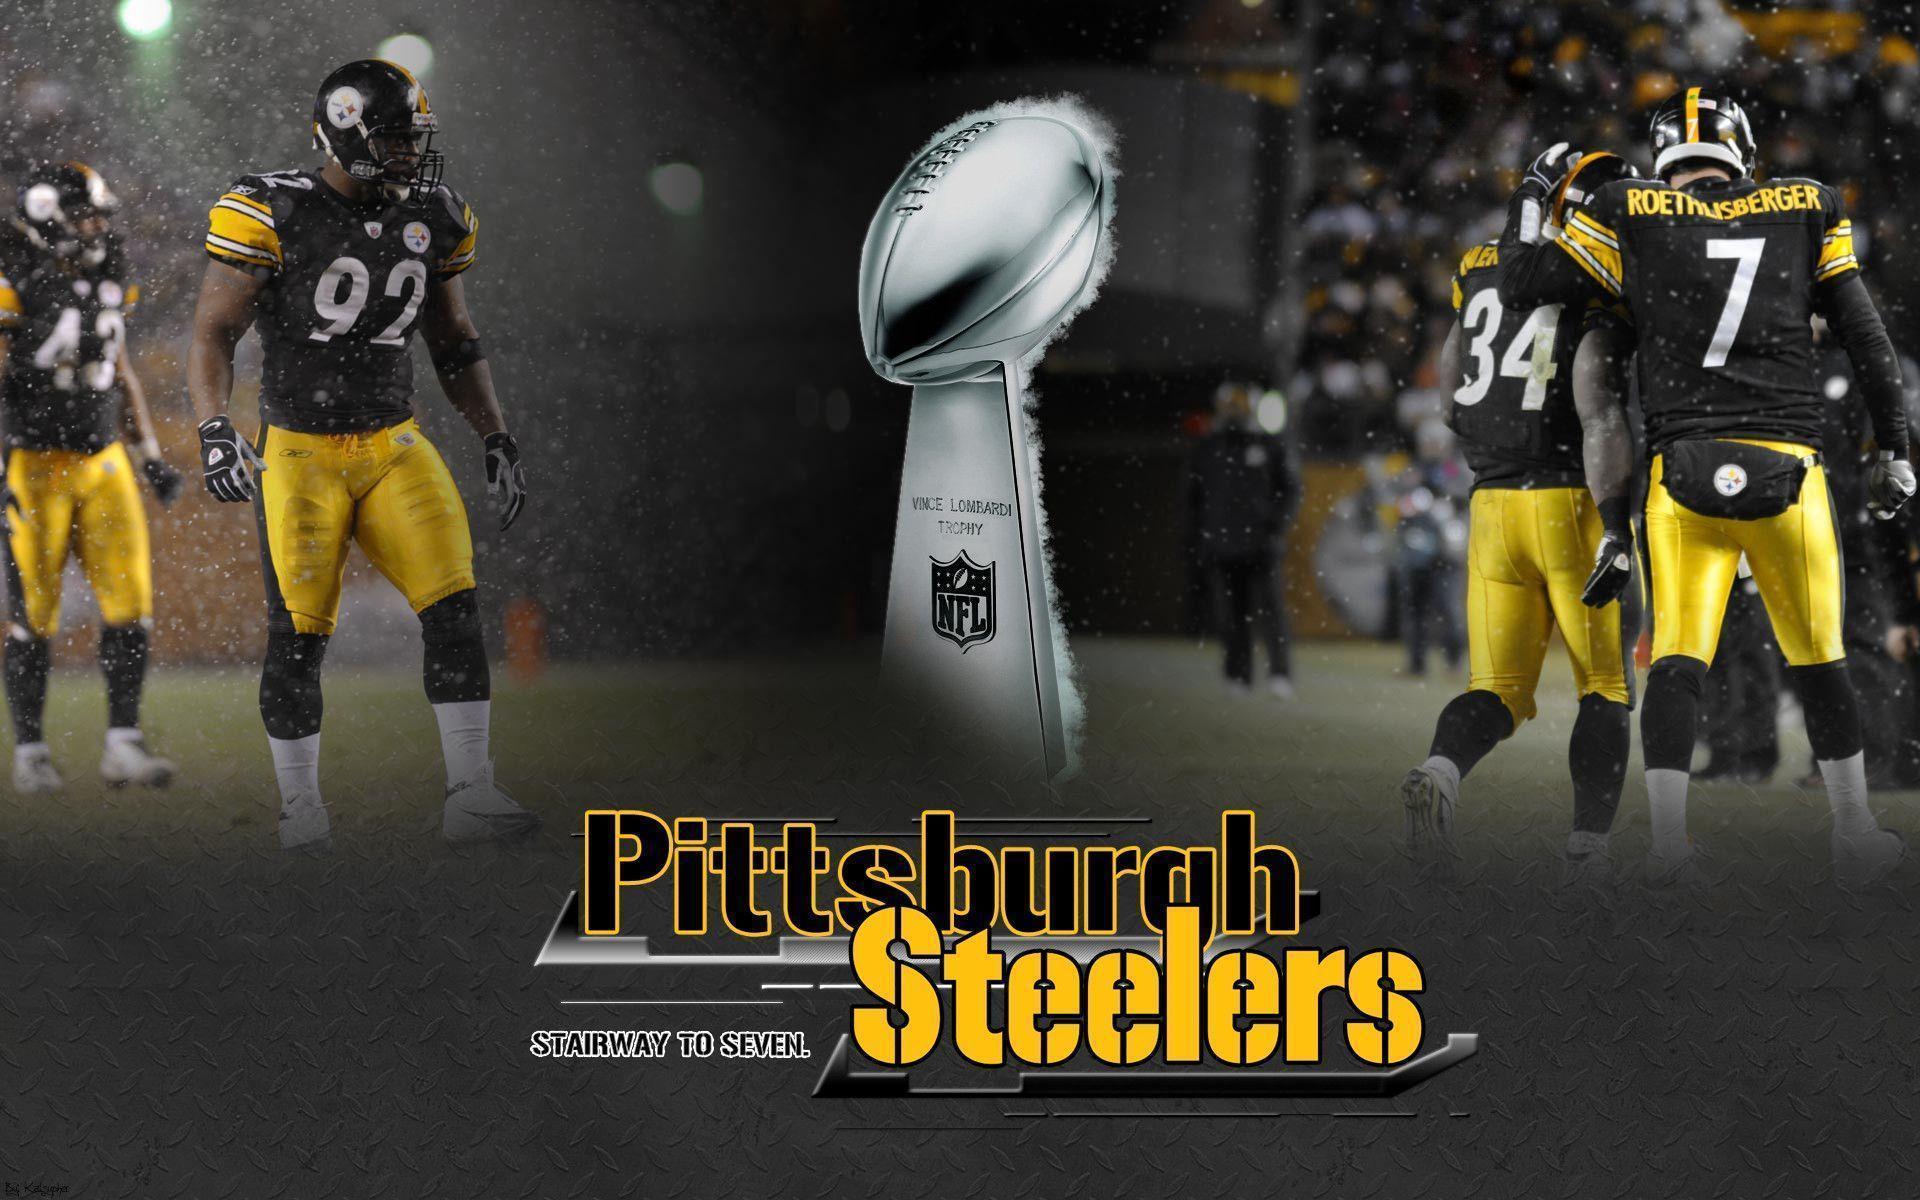 Wallpaper of the day: Pittsburgh Steelers wallpaper. Pittsburgh